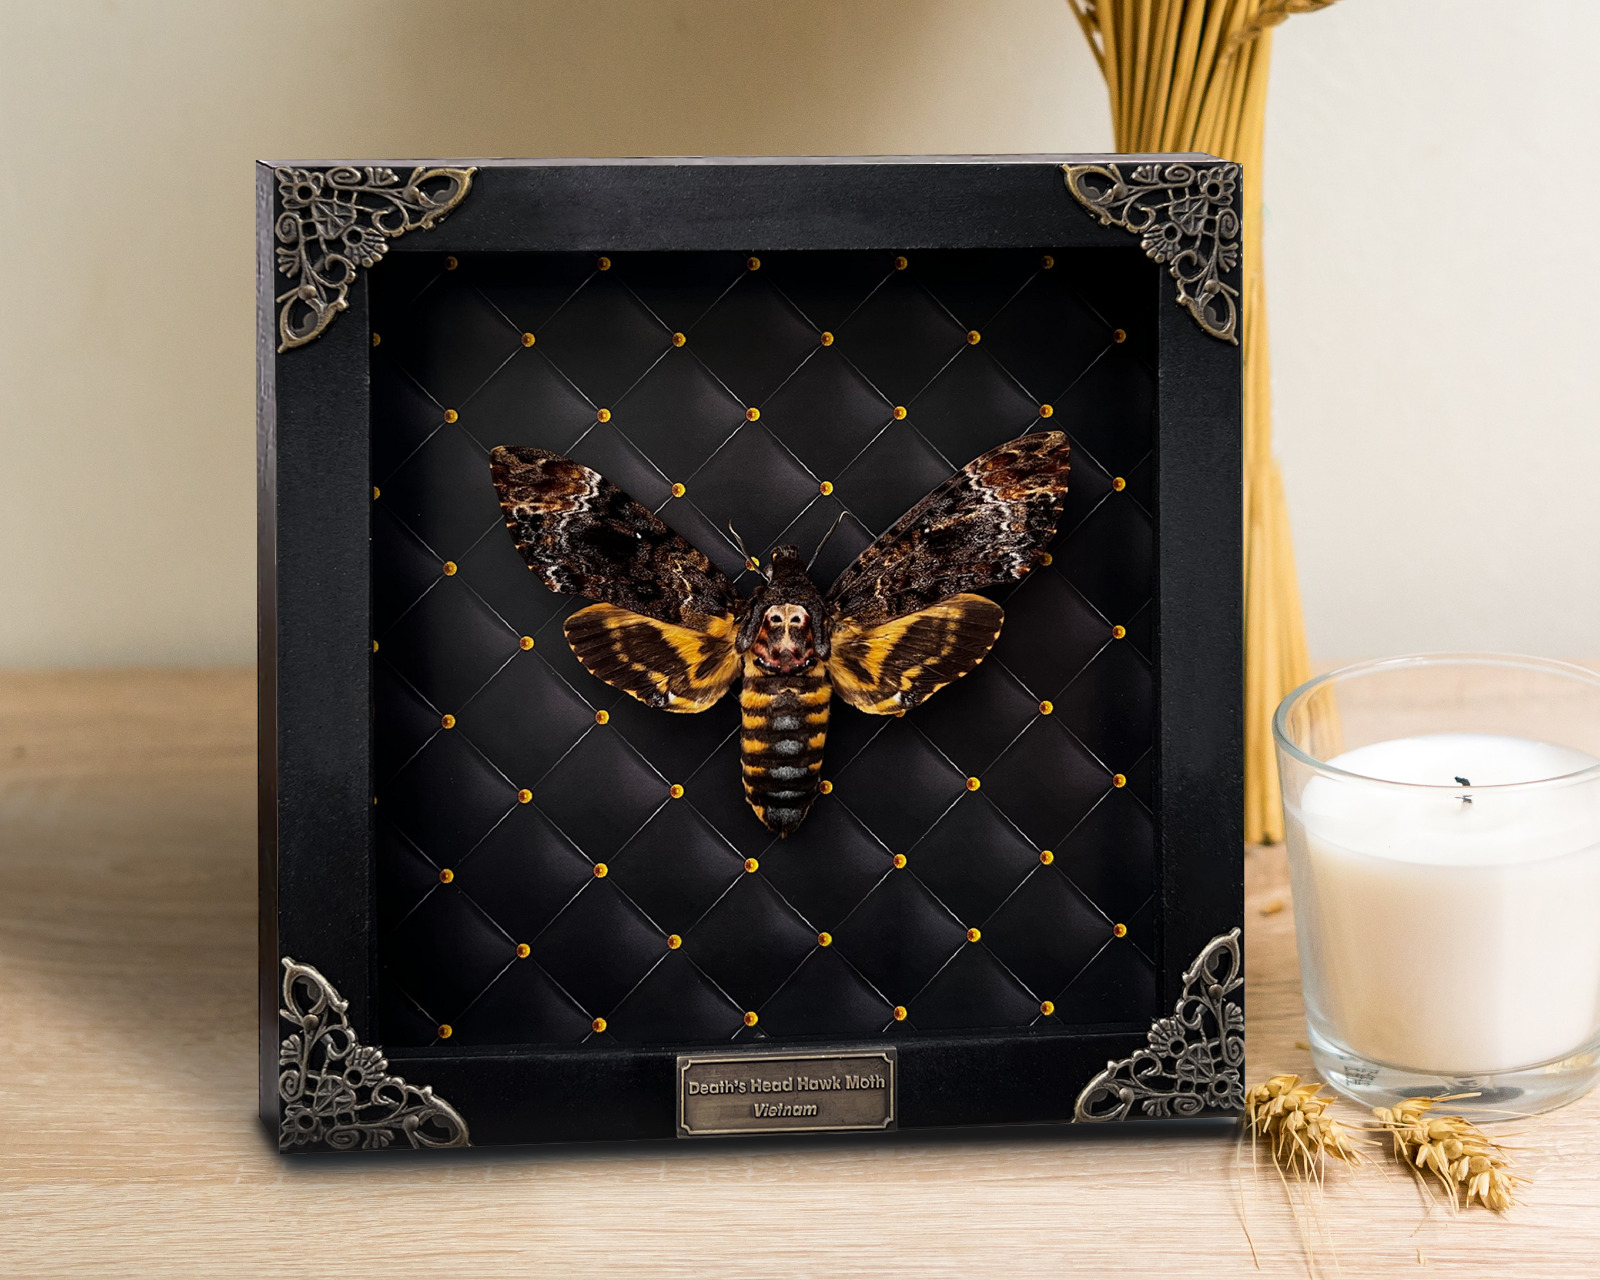 Real Vintage Death Head Moth Insect Framed Butterflies Bugs Taxidermy Beetle